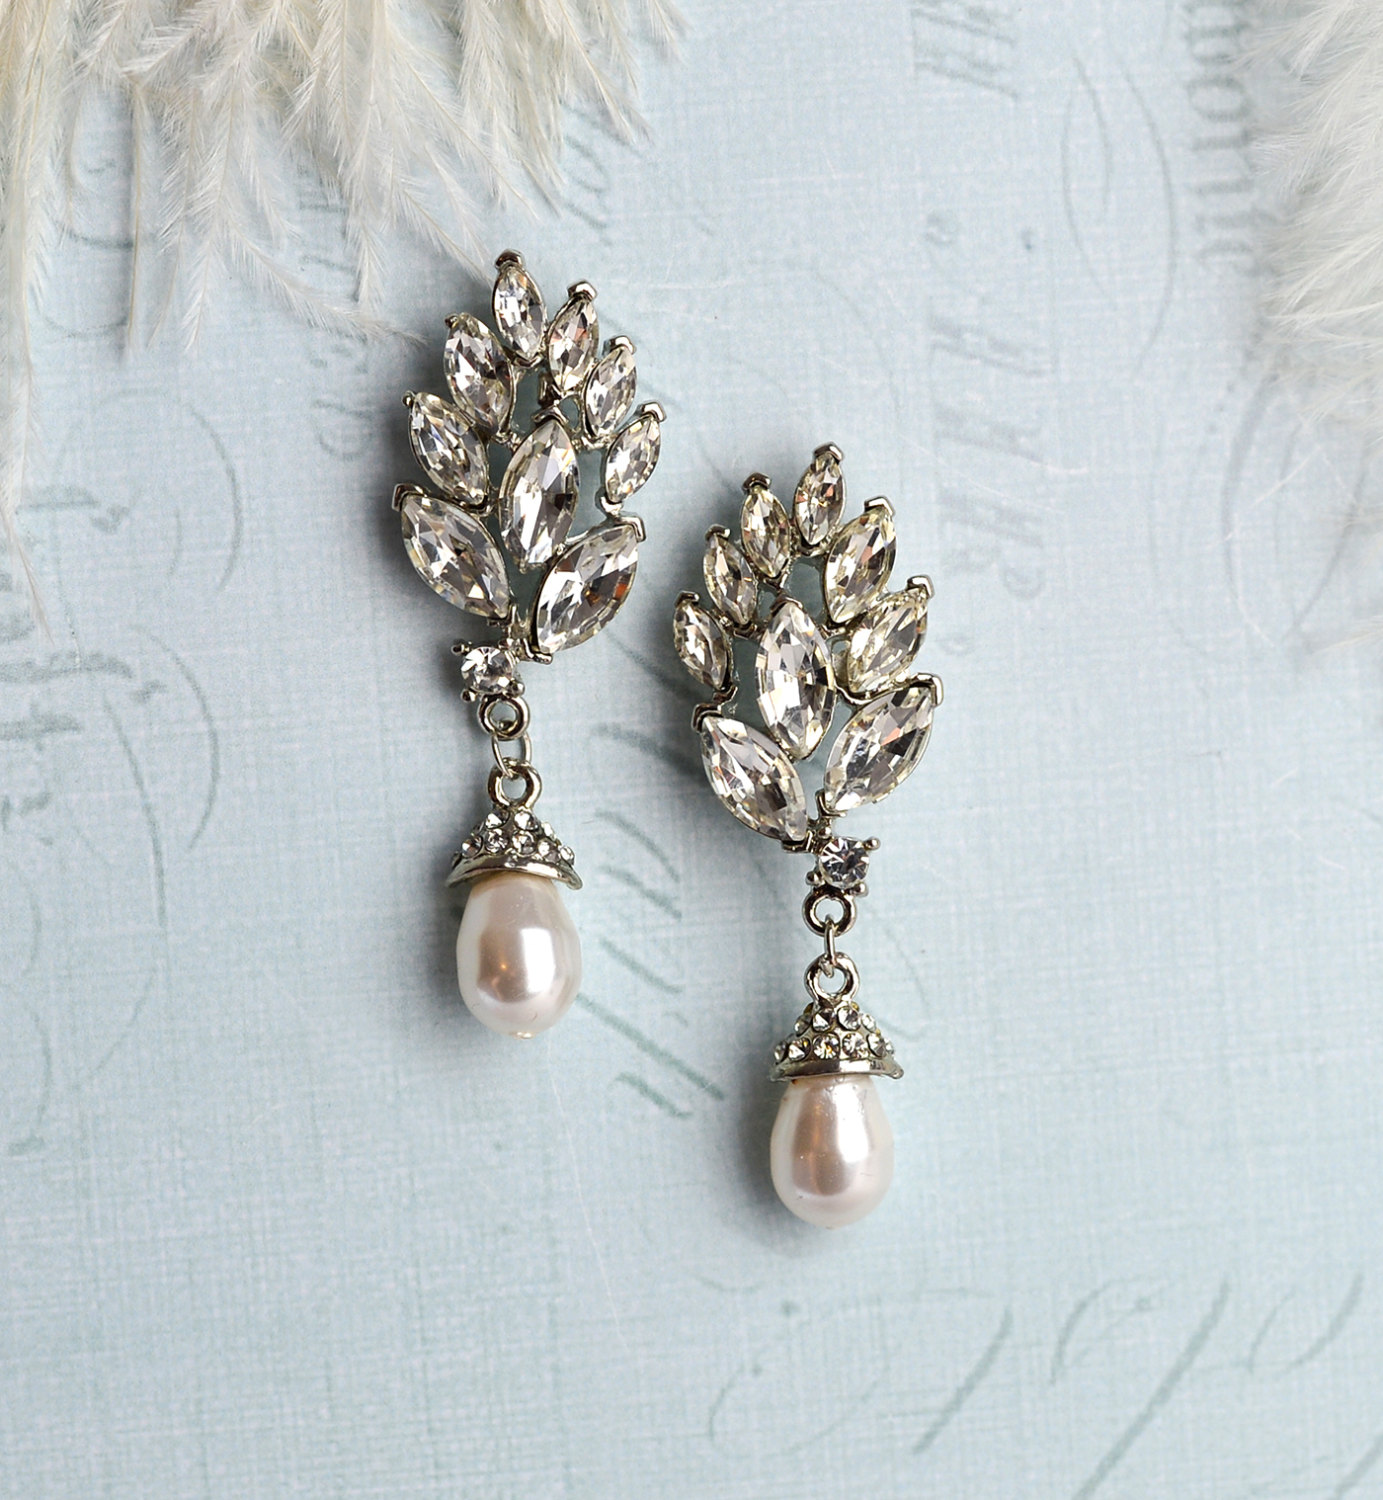 vintage style bridal earrings with pearl